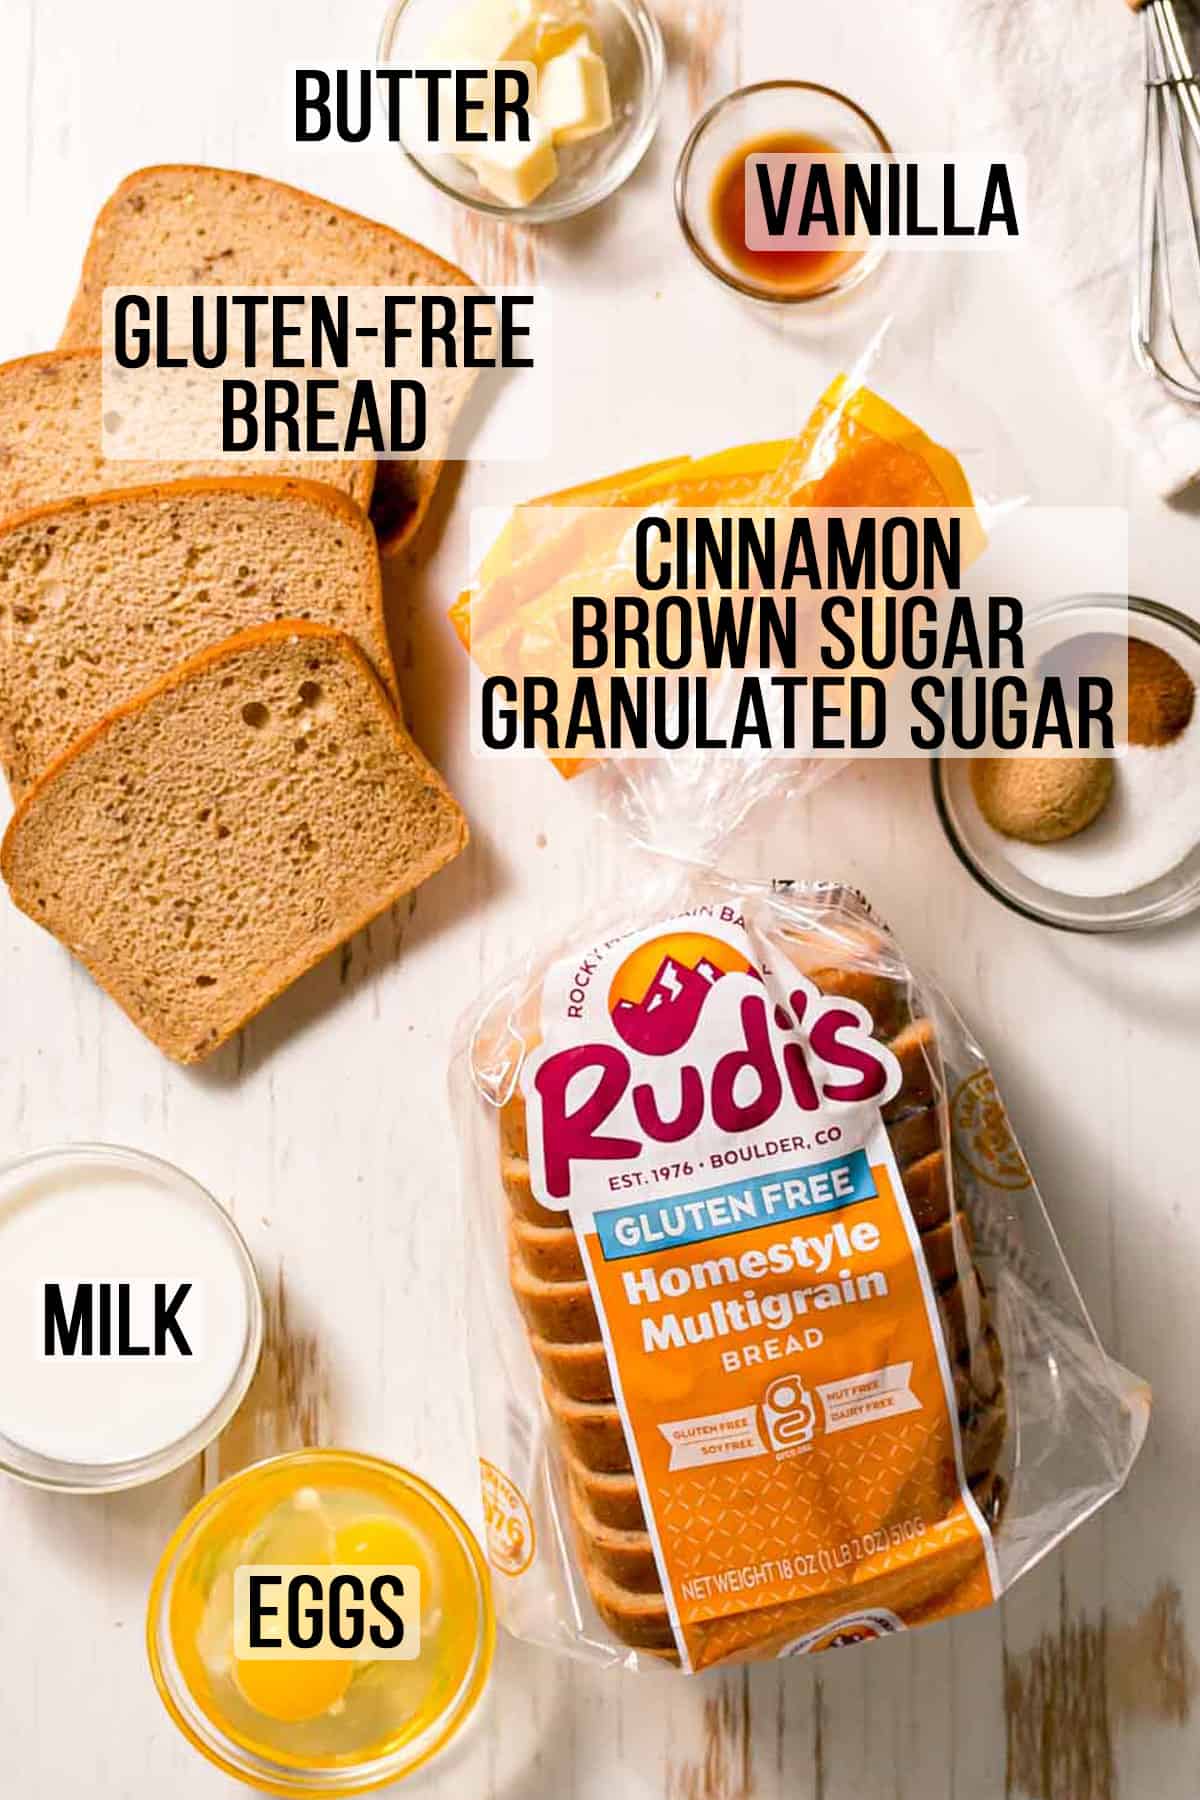 Gluten-free bread, milk, eggs, and sugar measured out in bowls.